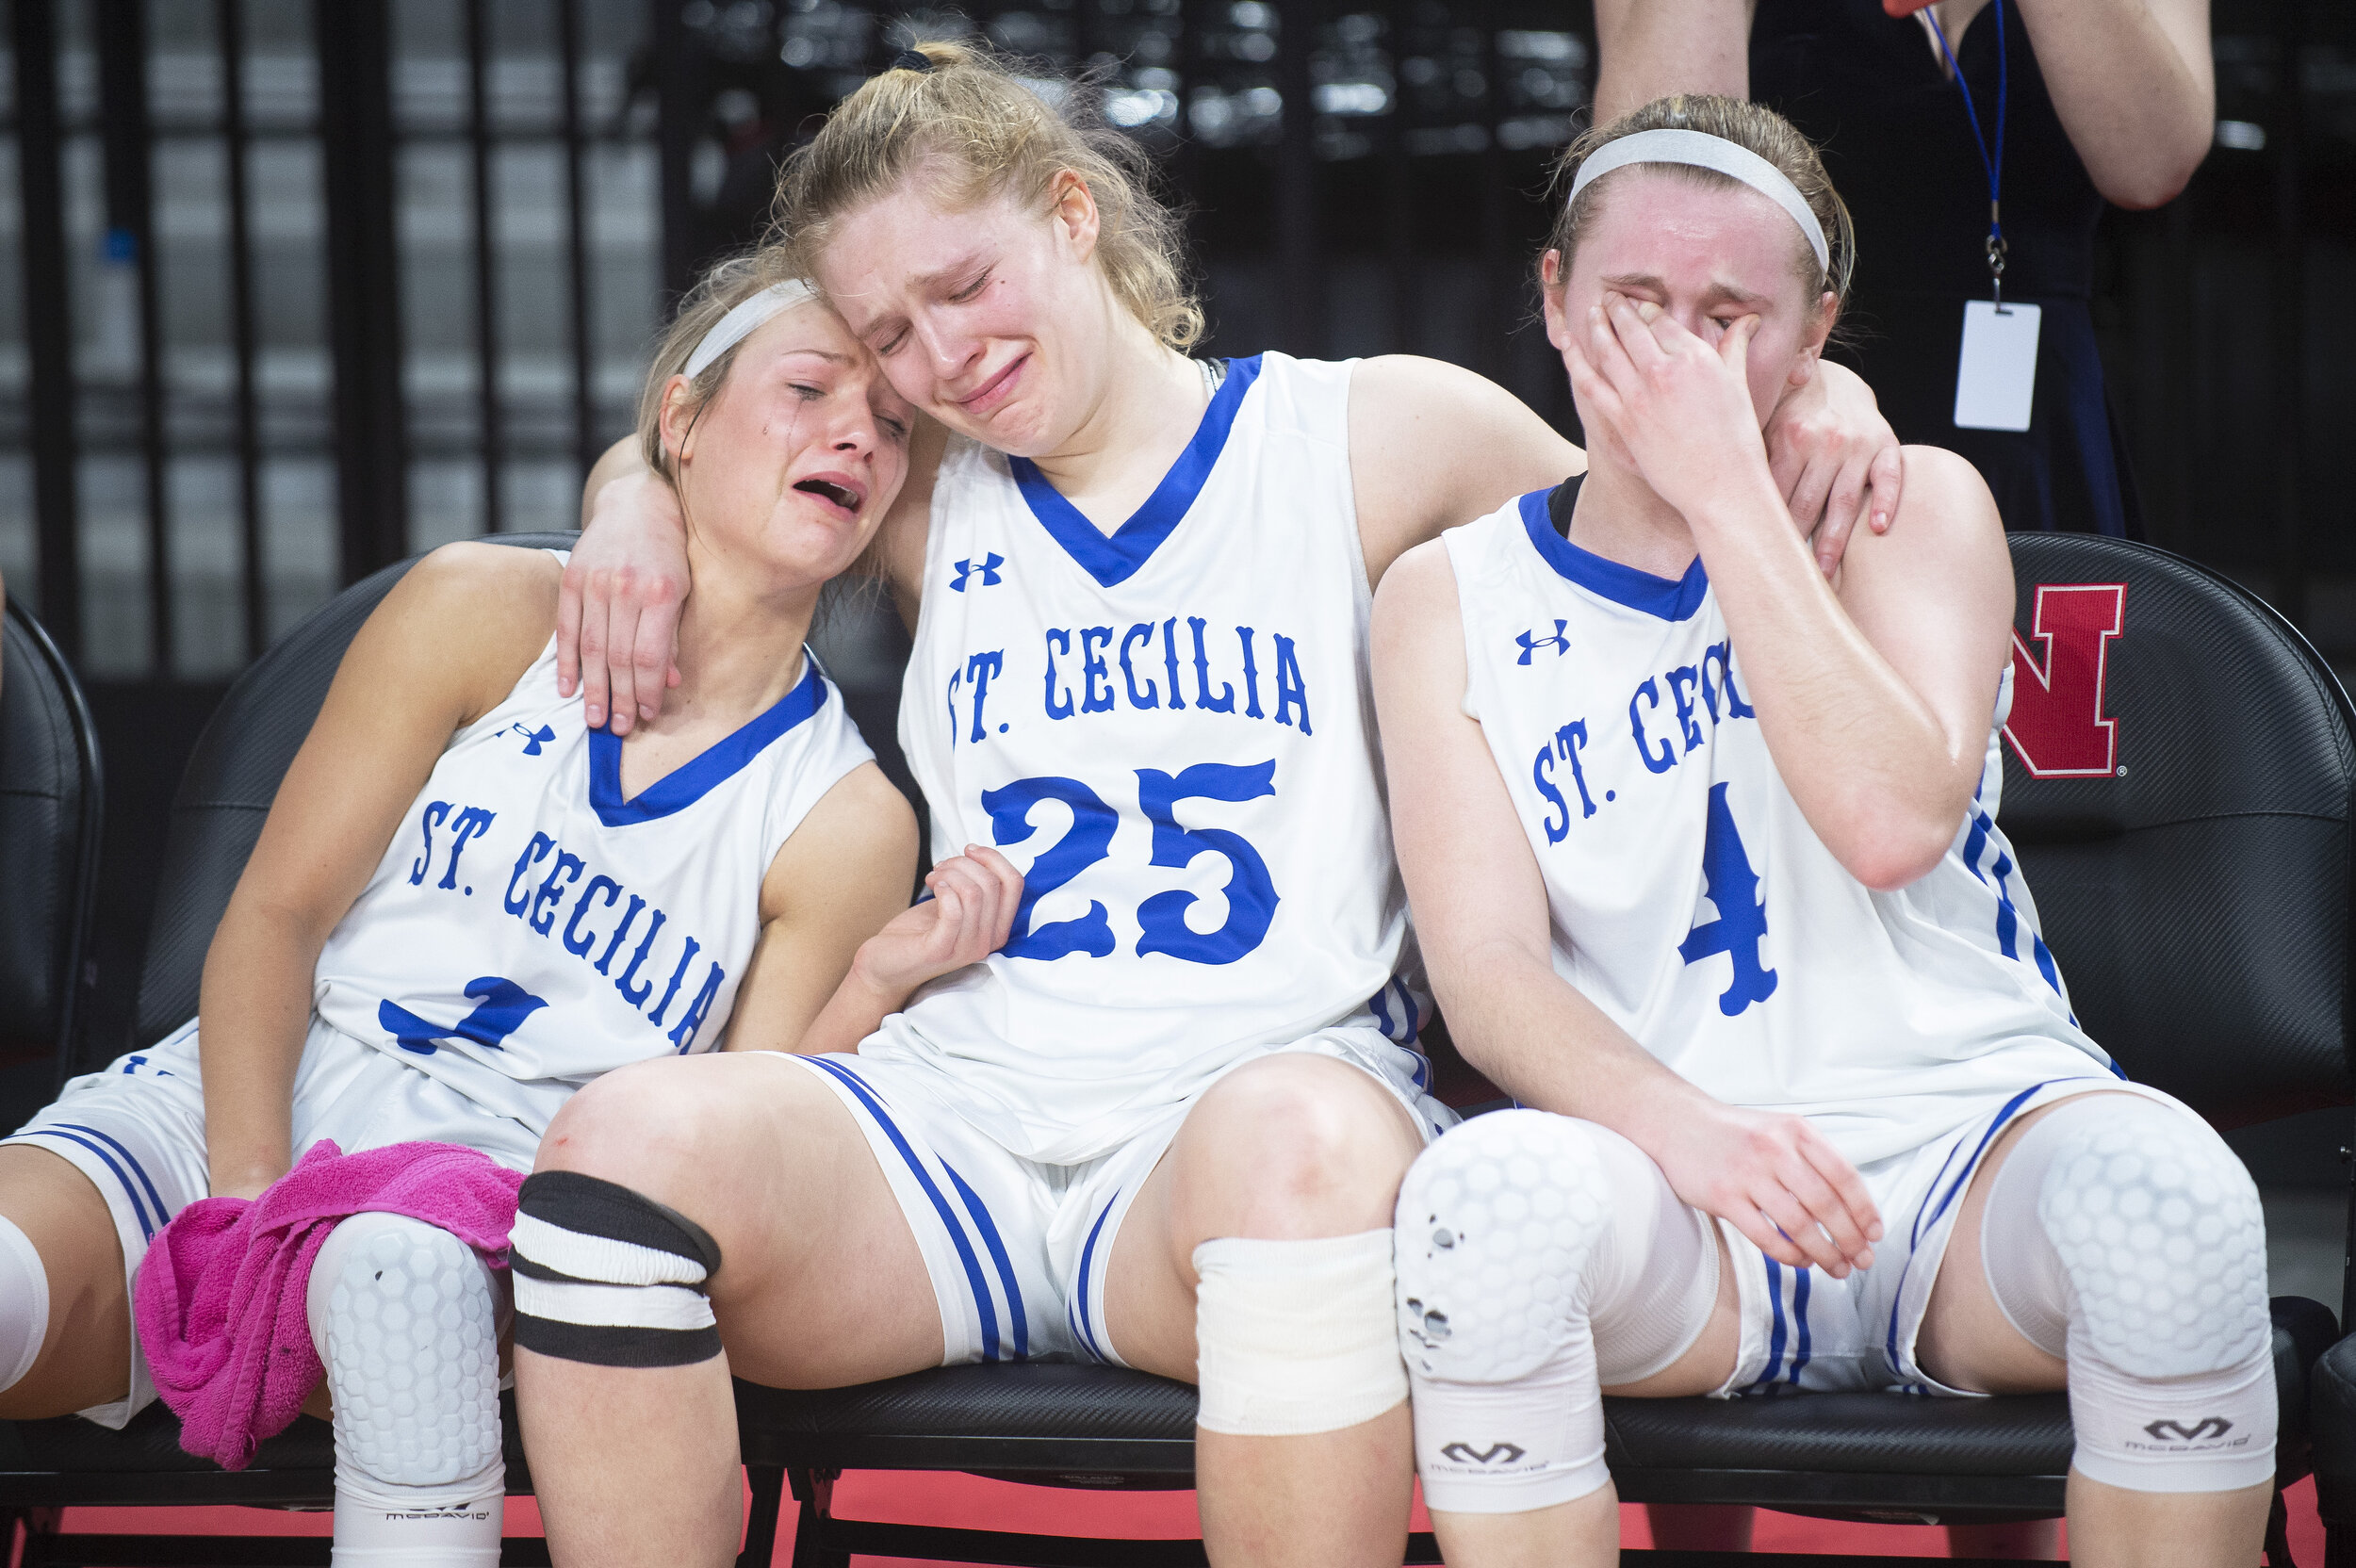  Hastings St. Cecilia's Katharine Hamburger (center) comforts teammates Erin Sheehy (left) and Bailey Kissinger as they wait for the runner-up trophy after losing the Class C1 state championship by a single point on Saturday, March 06, 2021, at Pinna